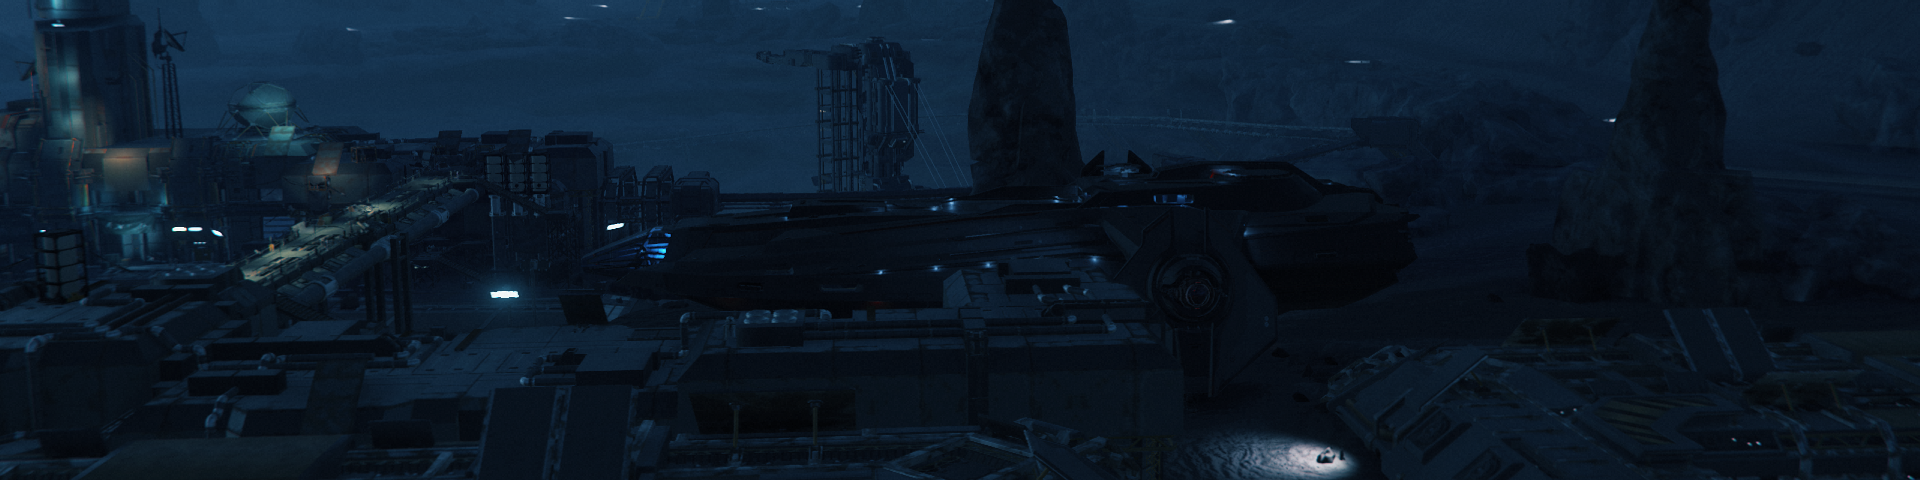 Portside view of a space frigate landed at a mining facility on a dark world.